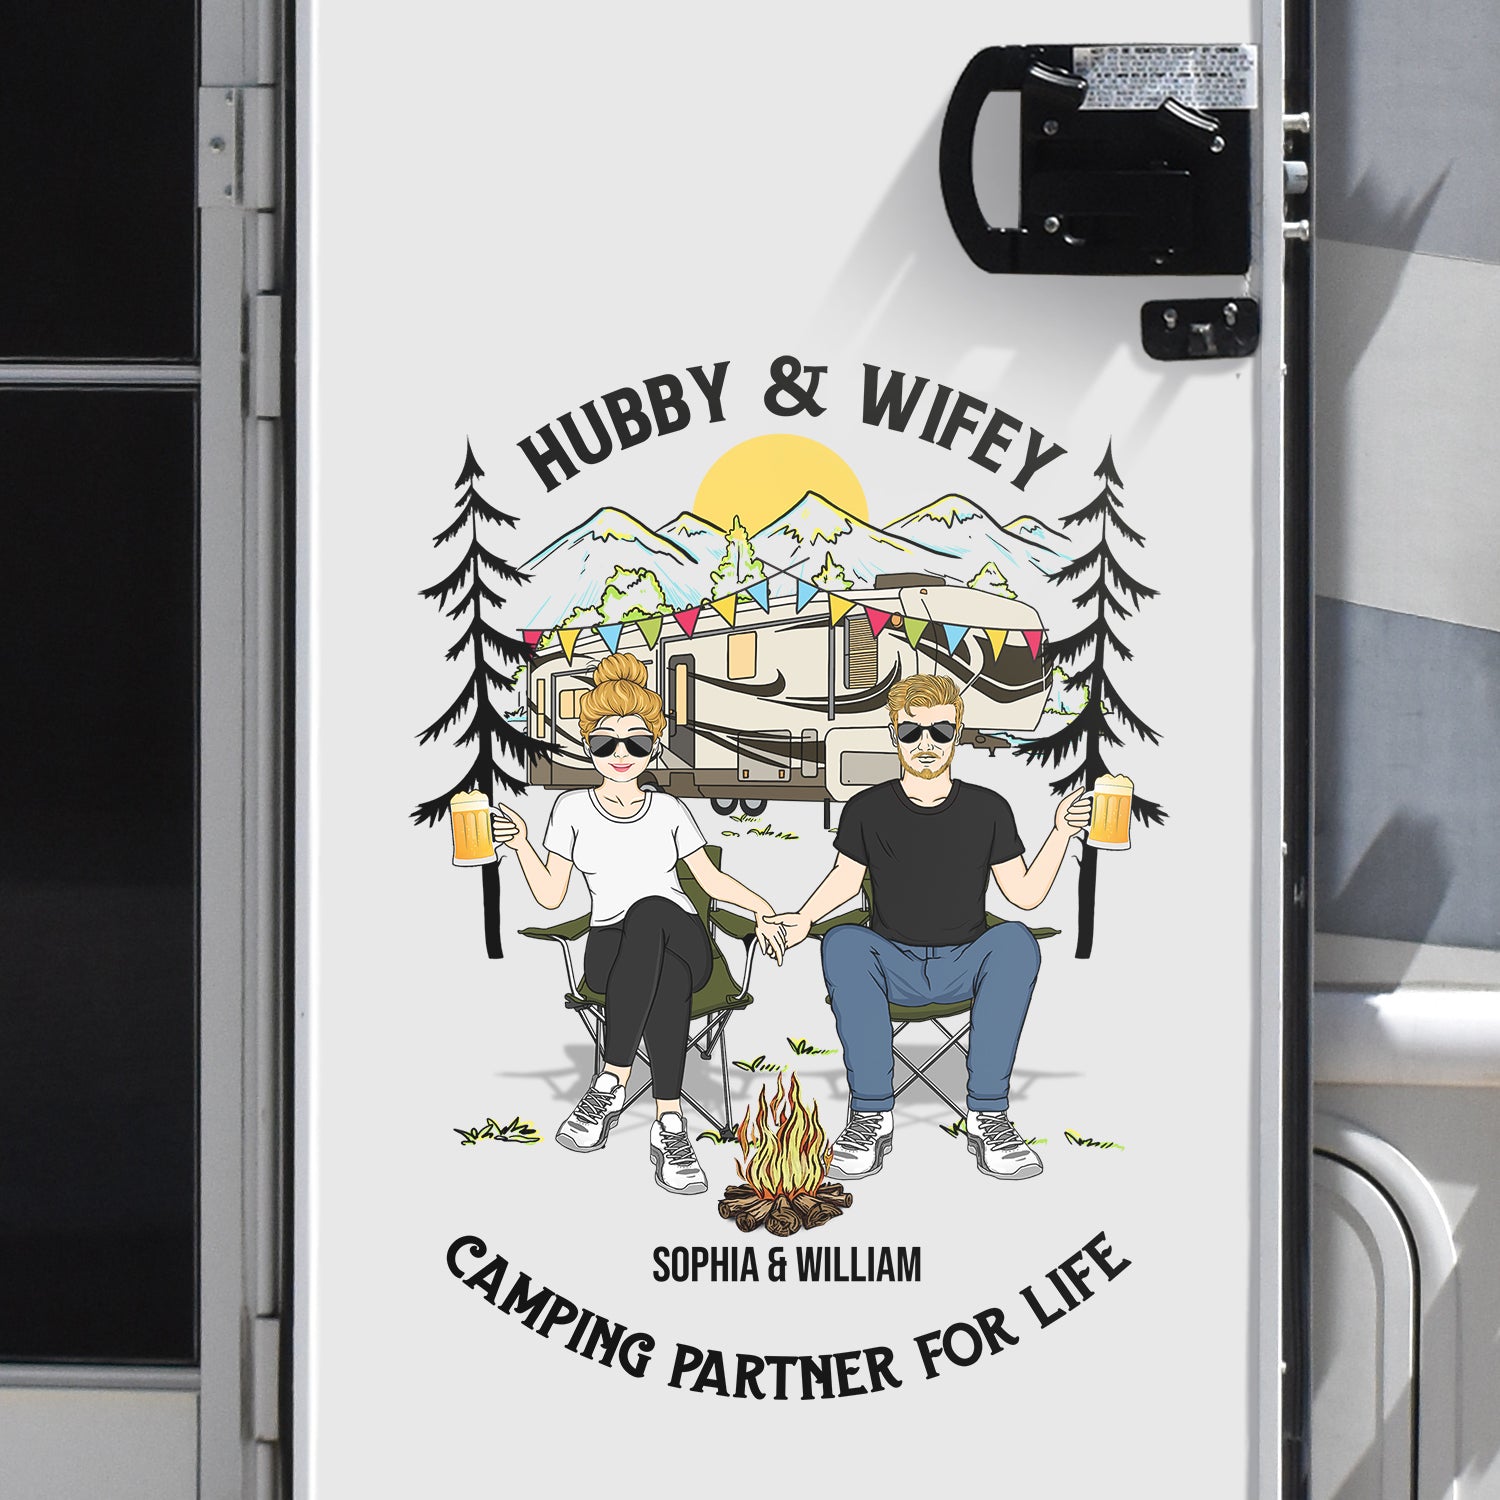 Hubby & Wifey Camping Partners For Life - Gift For Couples, Camping Lovers - Personalized Camping Decal, Decor Decal